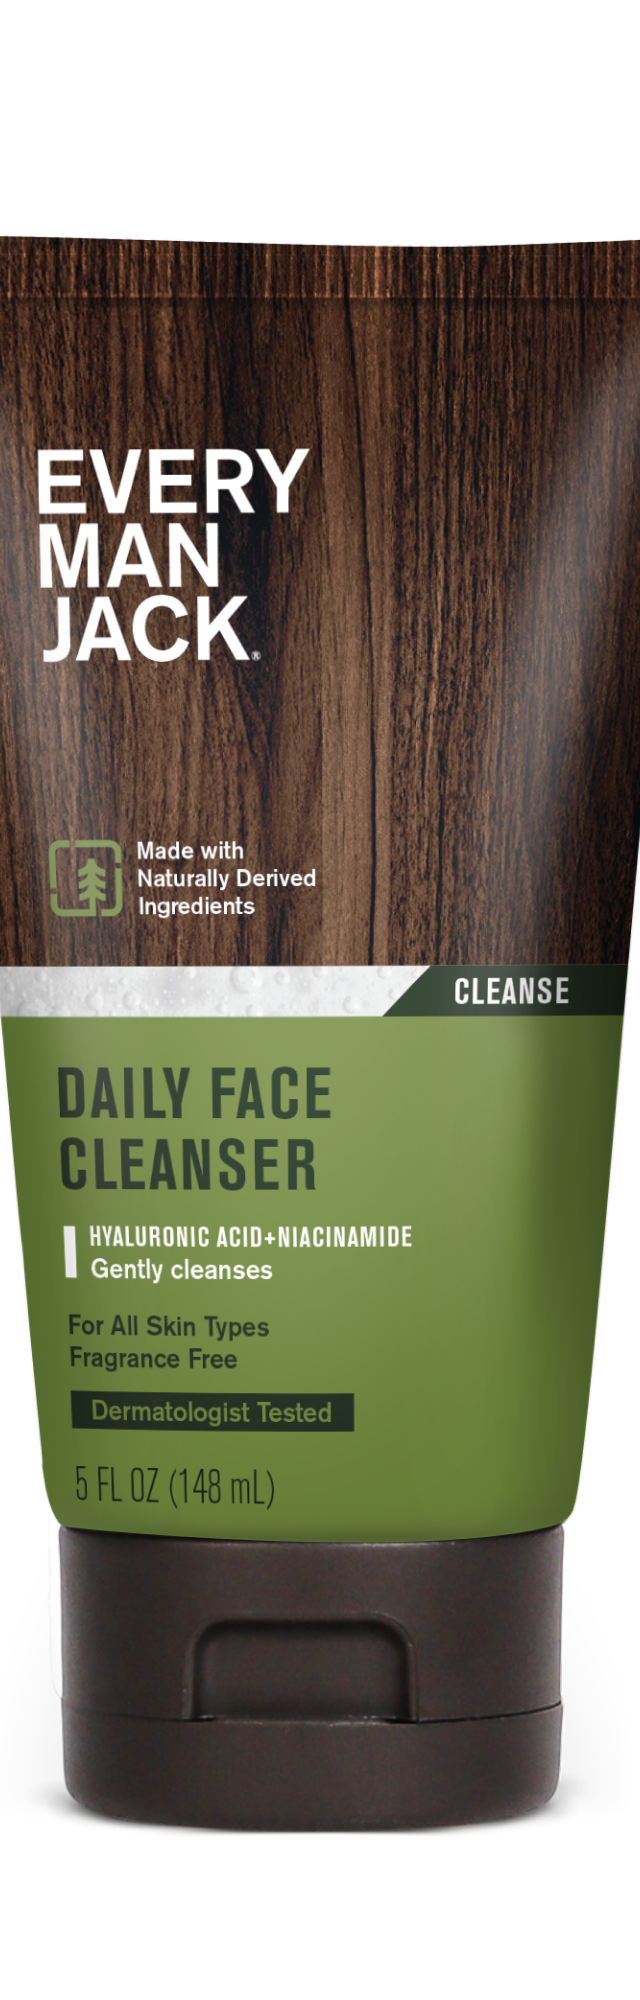 Daily Face Cleanser